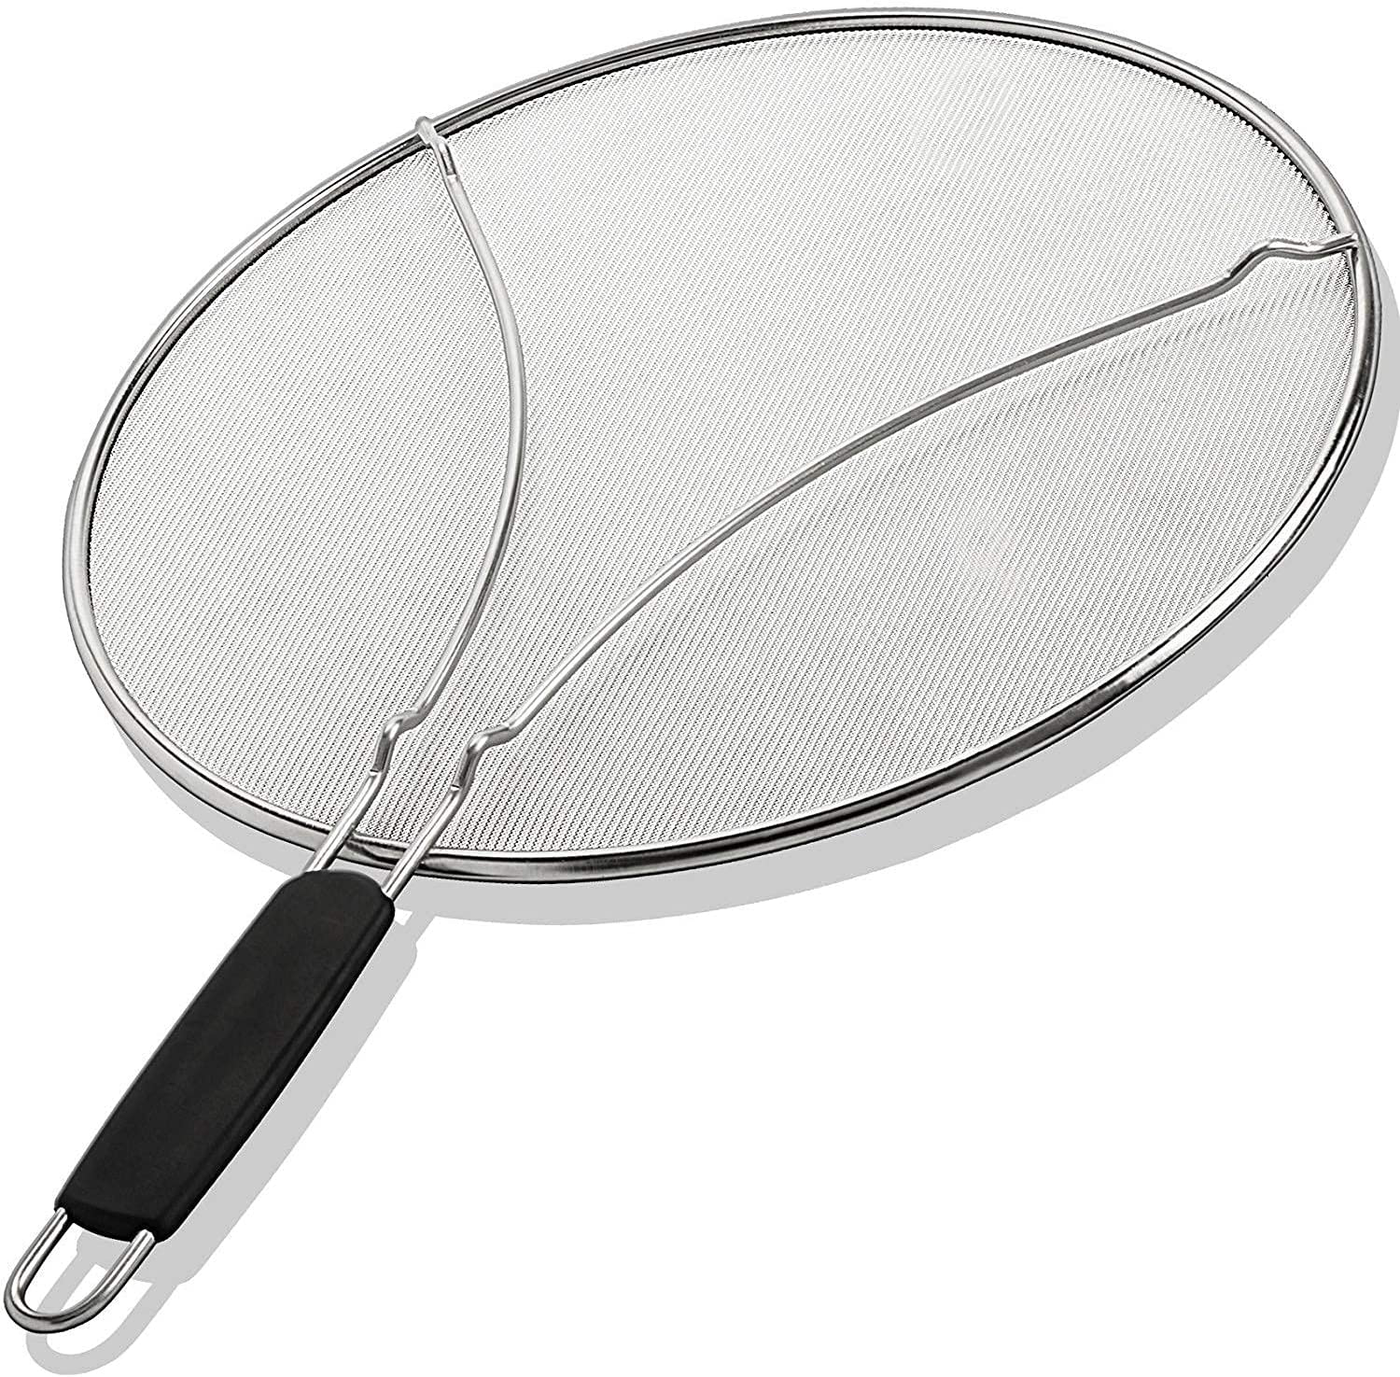 Grease Splatter Screen for Frying Pan 9.5" - Stops 99% of Hot Oil Splash - Protects Skin from Burns - Splatter Guard for Cooking - Iron Skillet Lid Keeps Kitchen Clean - Stainless Steel